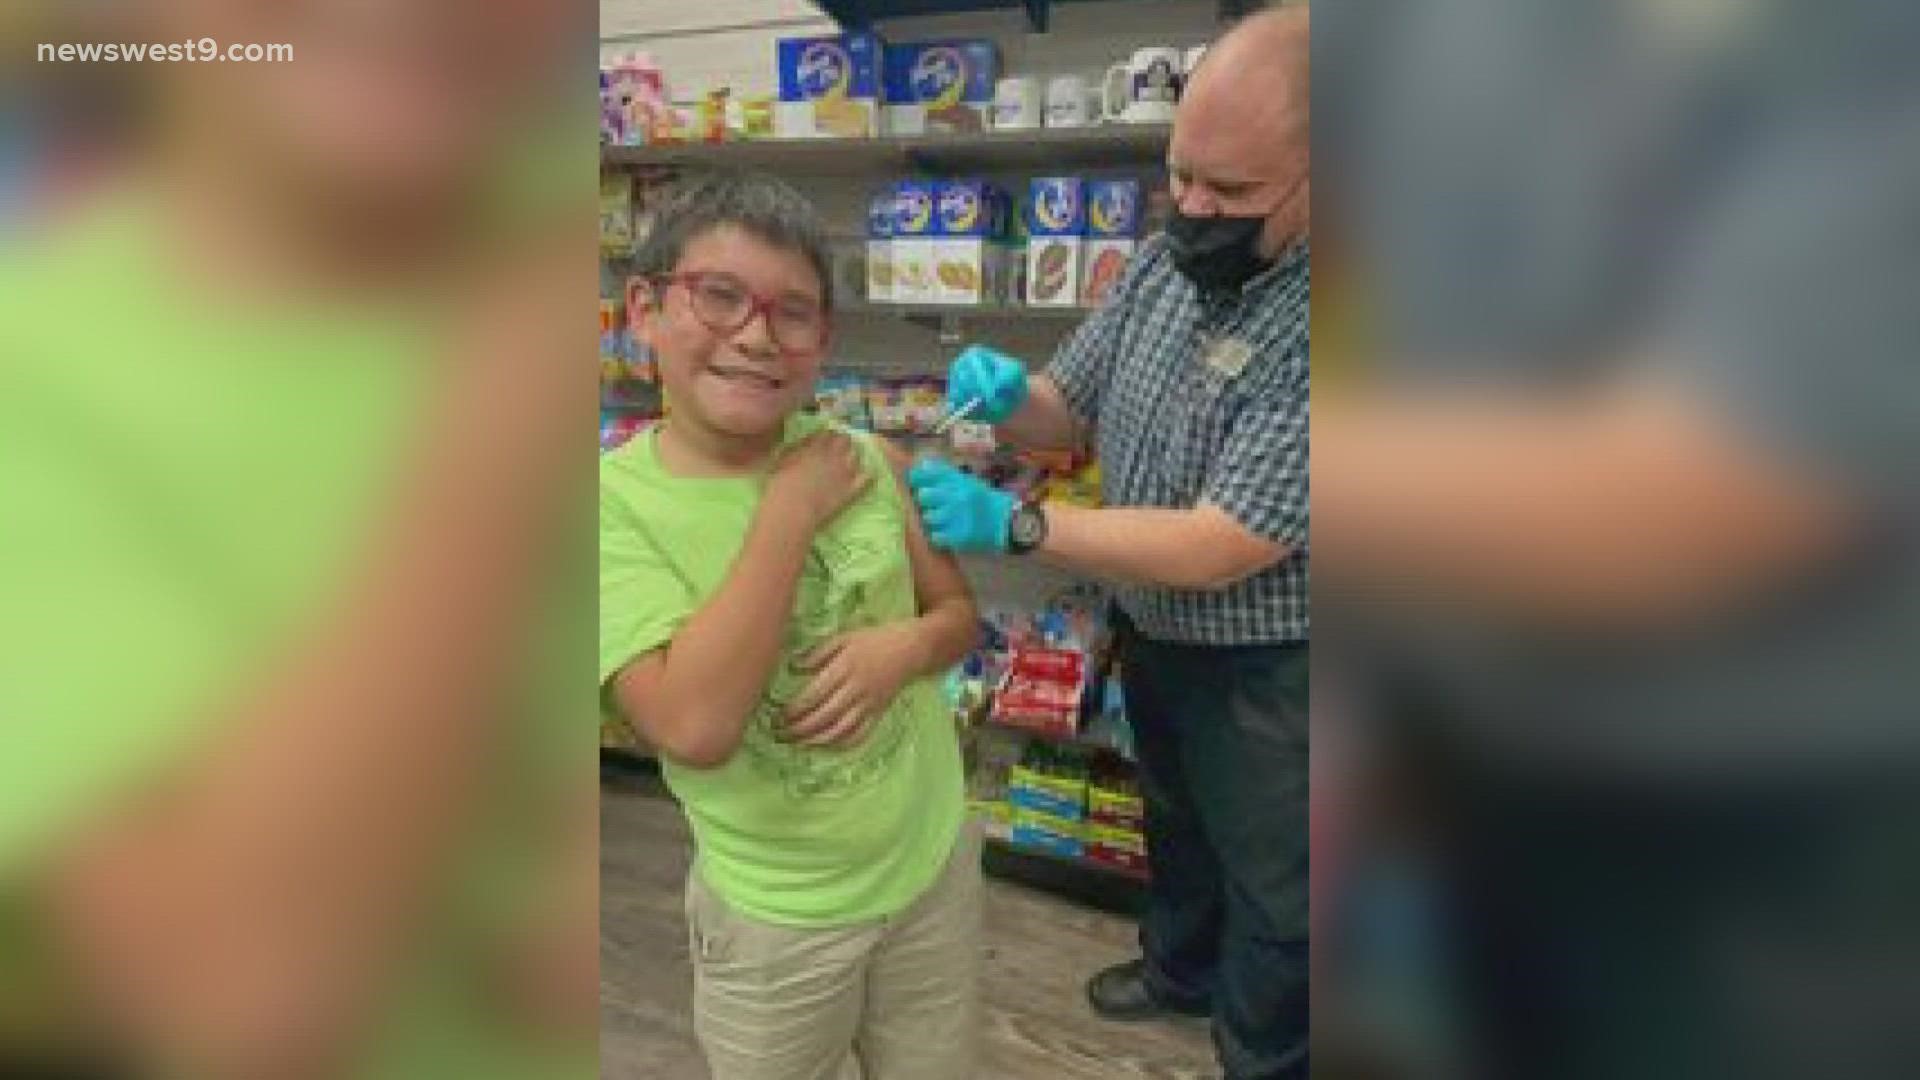 Brian Meyer, pharmacist and owner of Sunflower Pharmacy in Odessa, received the vaccines for kids last Friday and already has vaccinated more than 50 kids.